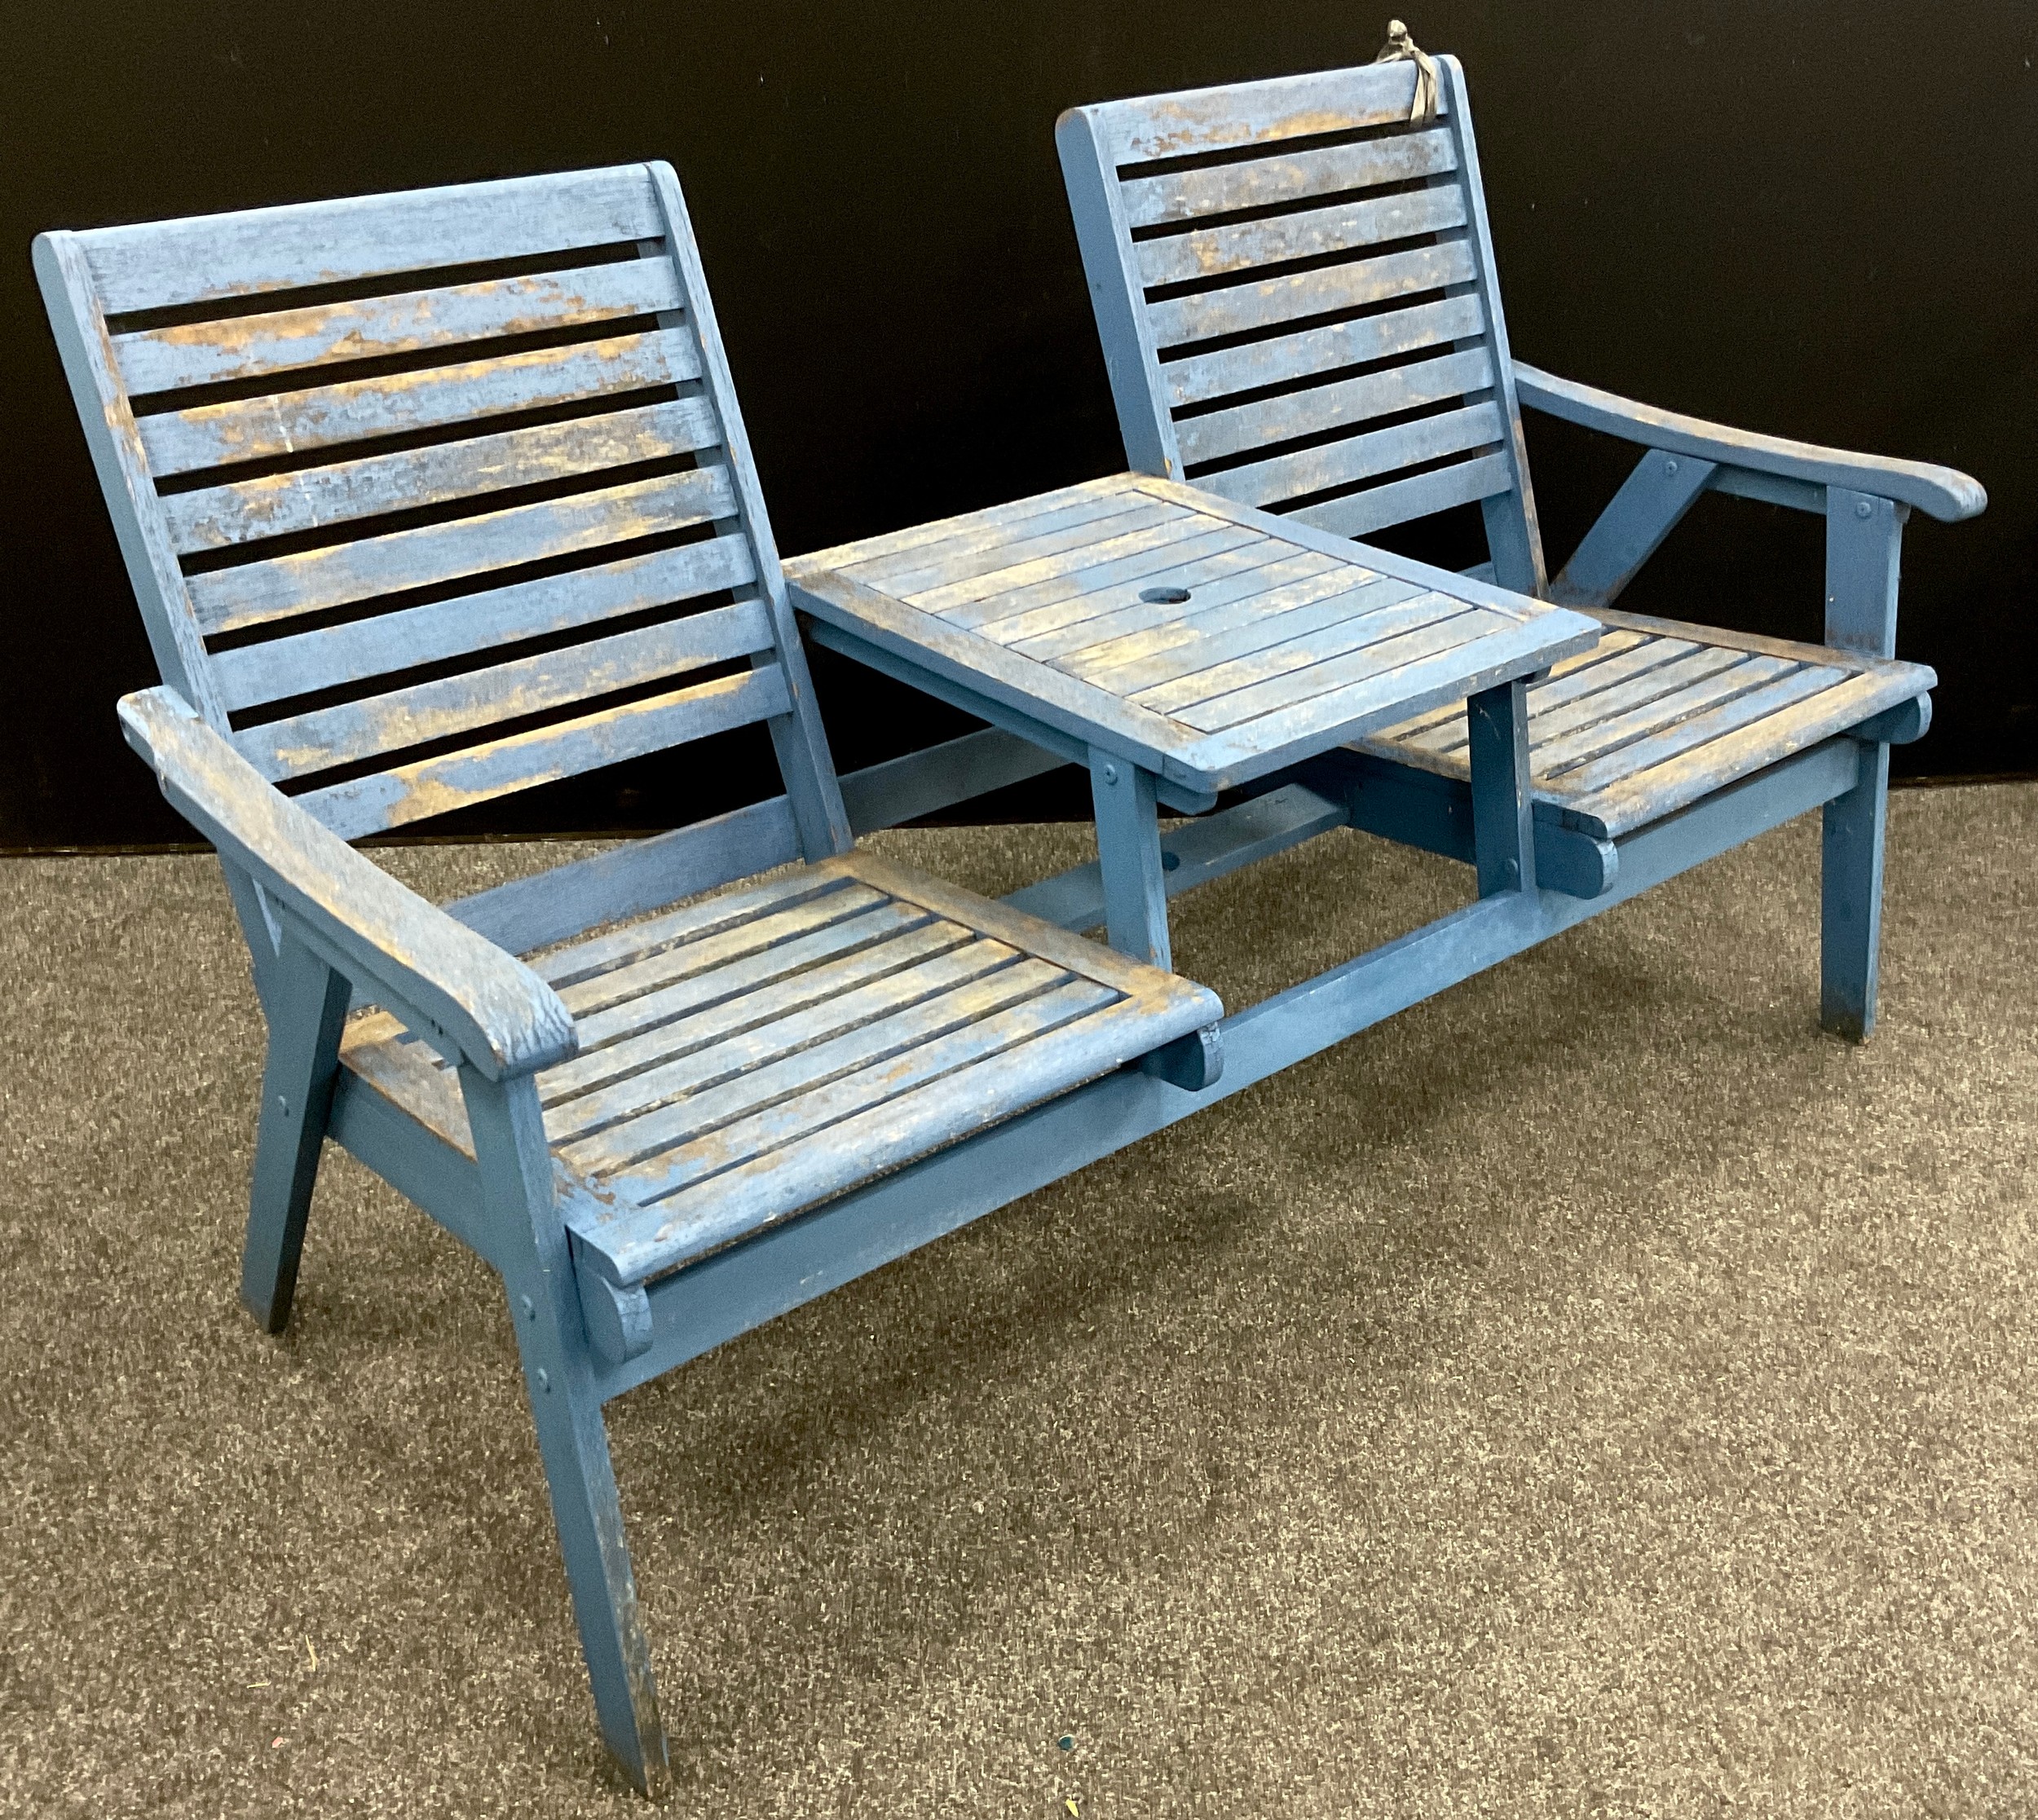 Garden Furniture - a two seater garden bench, the centre section with table divider, approx 92cm x